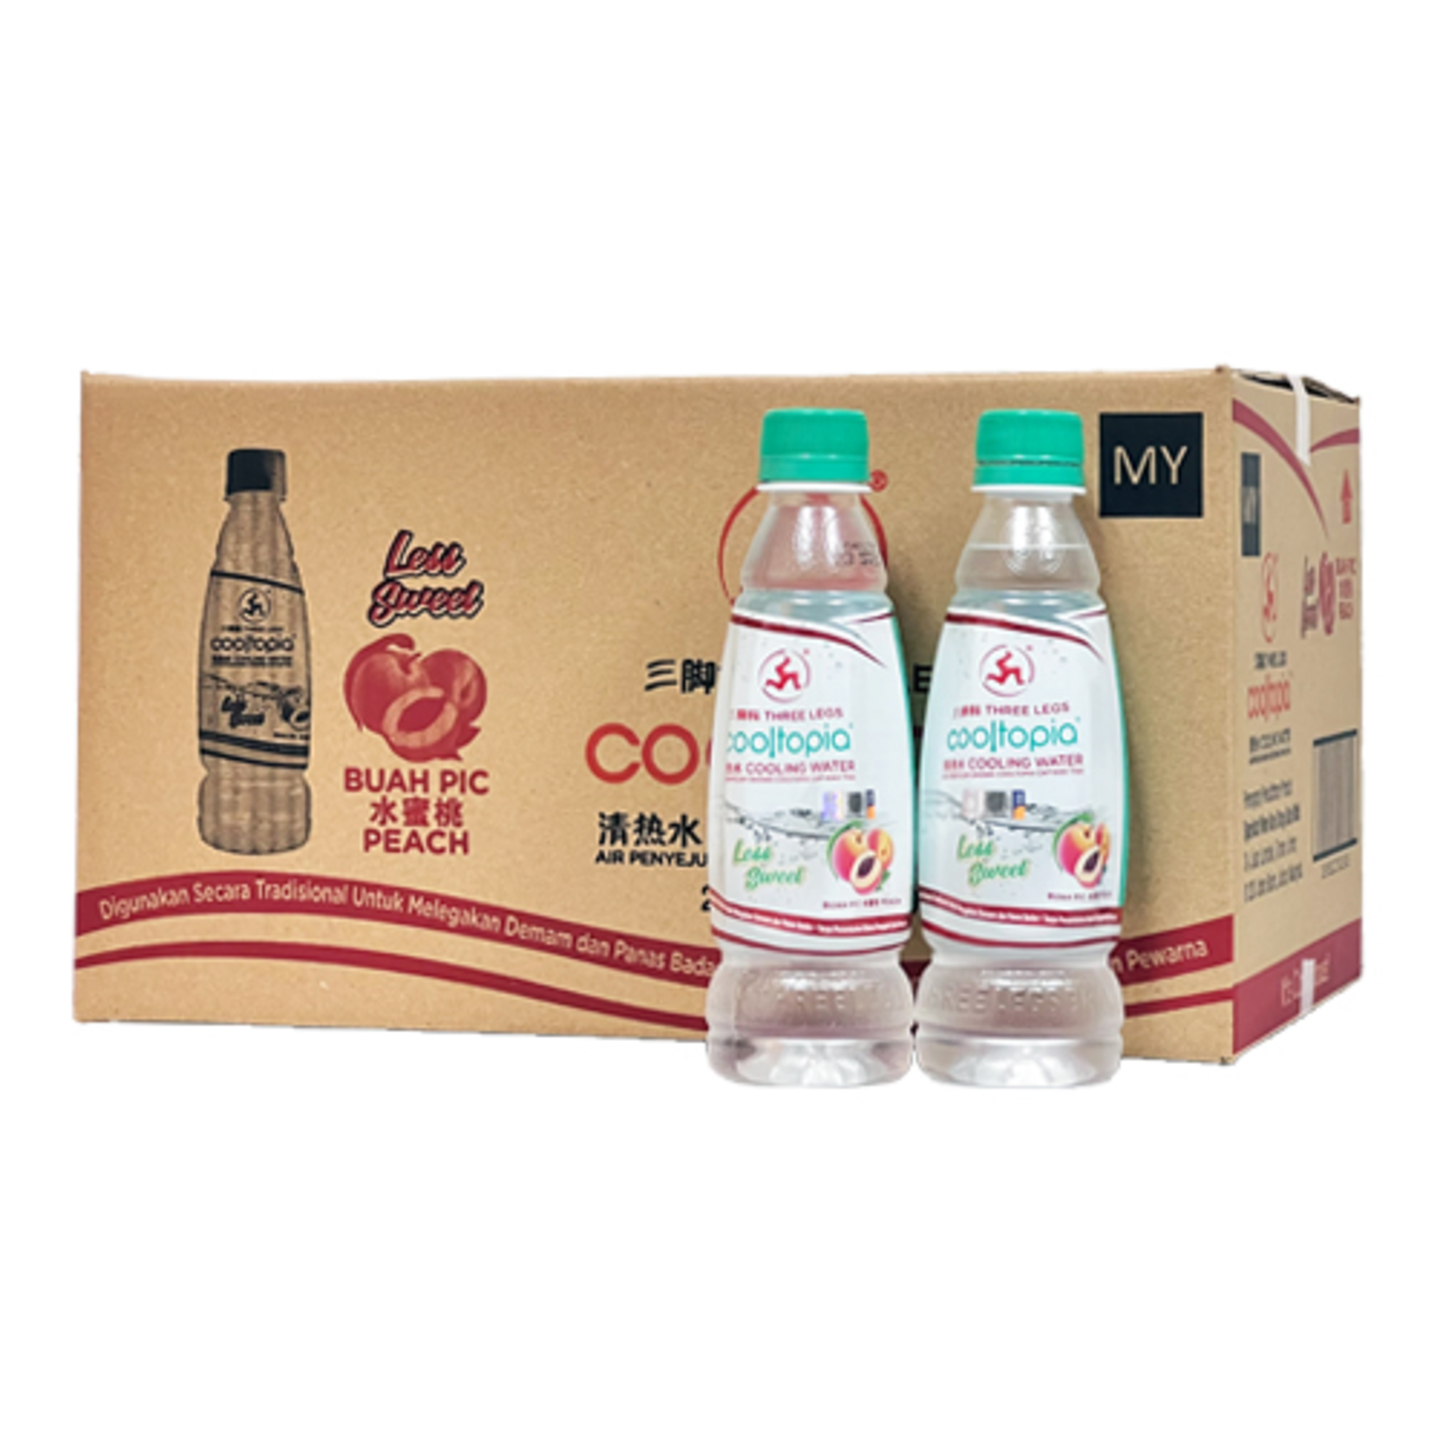 THREE LEGS COOLTOPIA COOLING WATER - PEACH (LESS SWEET) - 320ML x 24